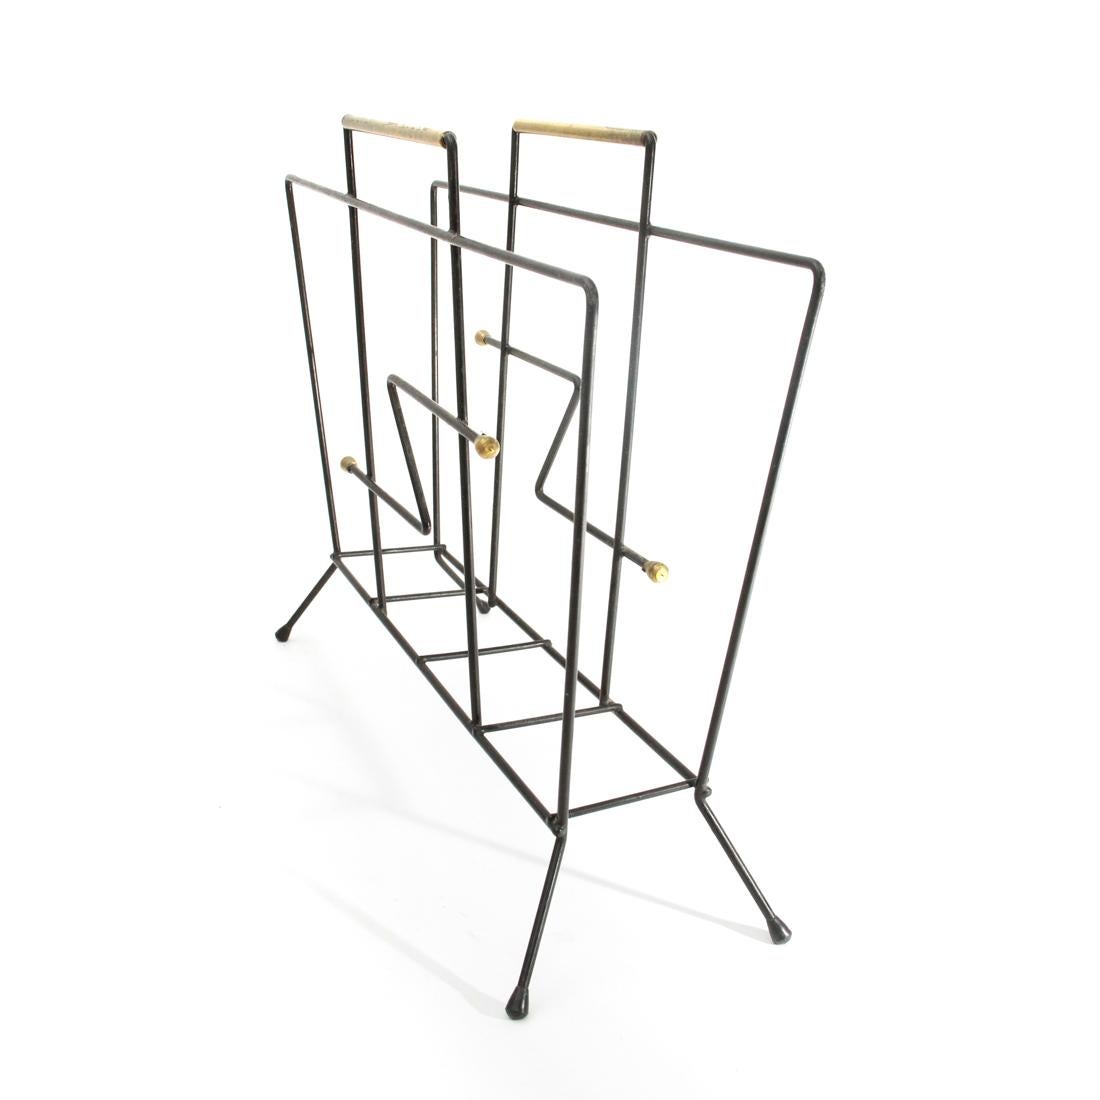 Italian made magazine rack produced in the 1950s.
Structure in bent metal rod and painted in black with brass details.
Good general conditions, some signs due to normal use over time.

Dimensions: Length 42 cm - Depth 11 cm - Height 34 cm.